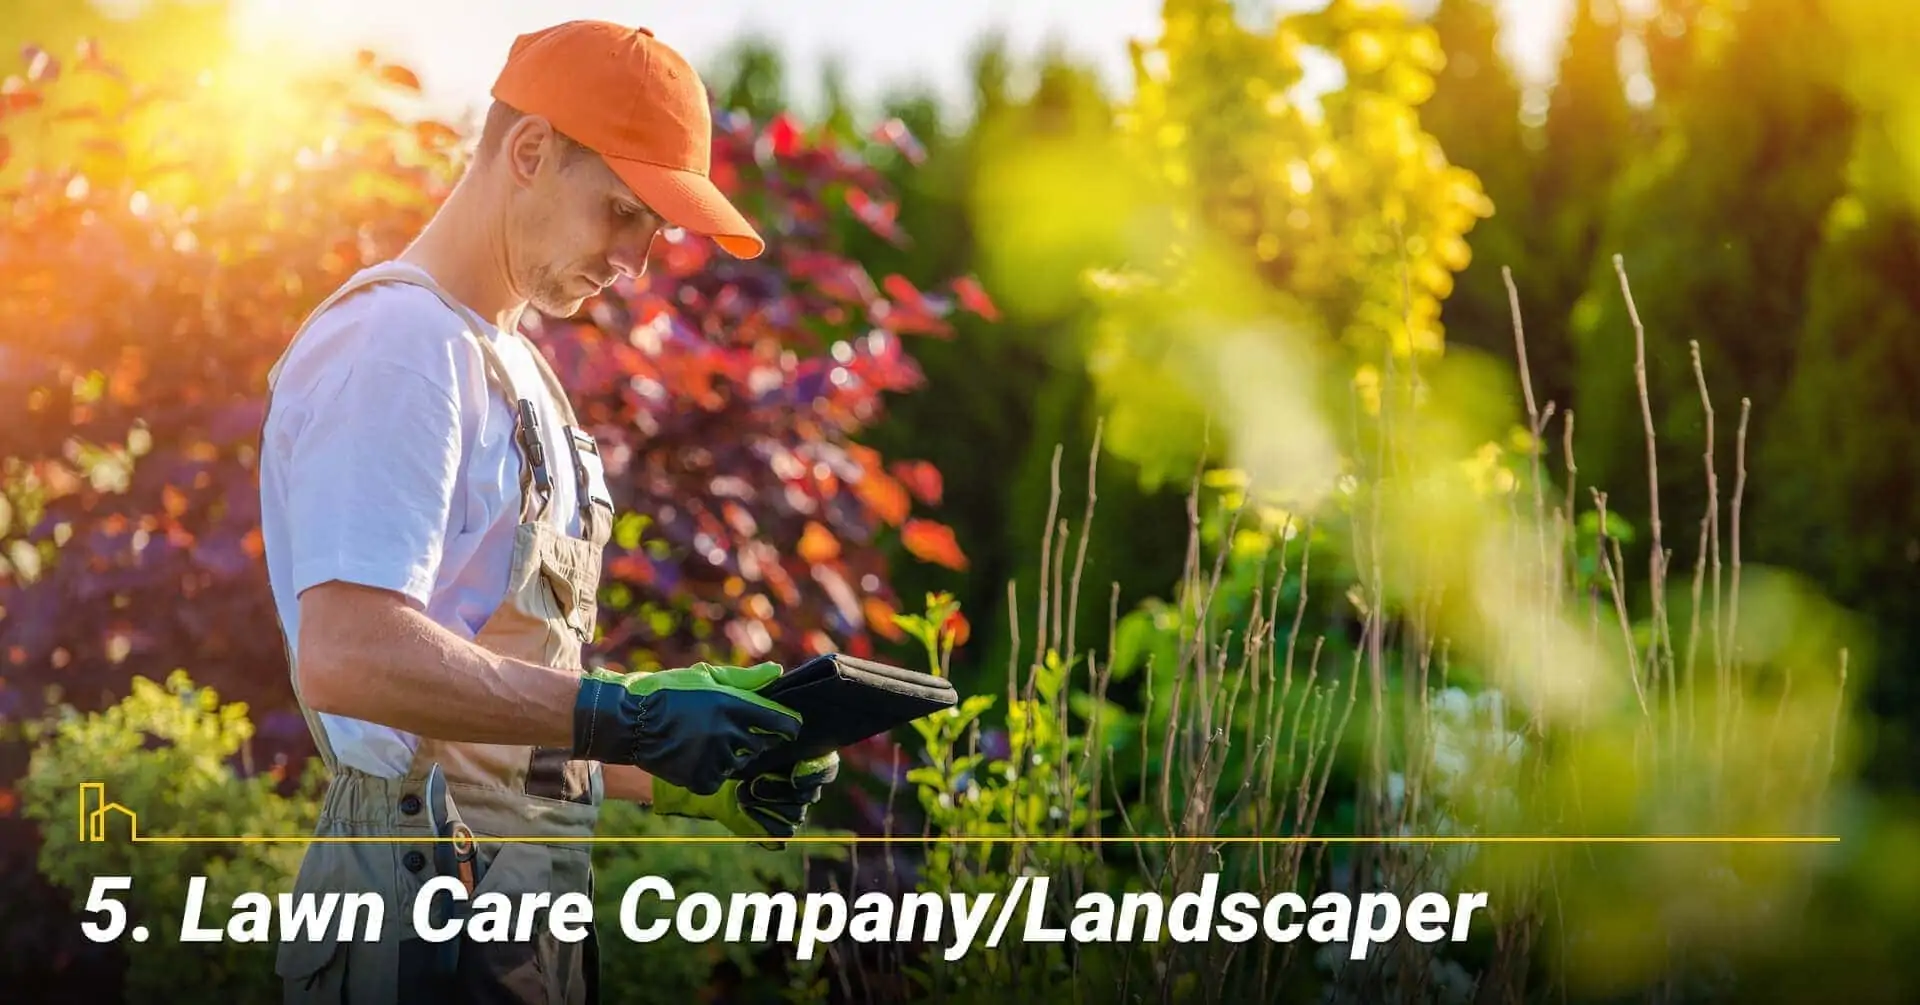 Lawn Care Company/Landscaper, get help maintain your lawn